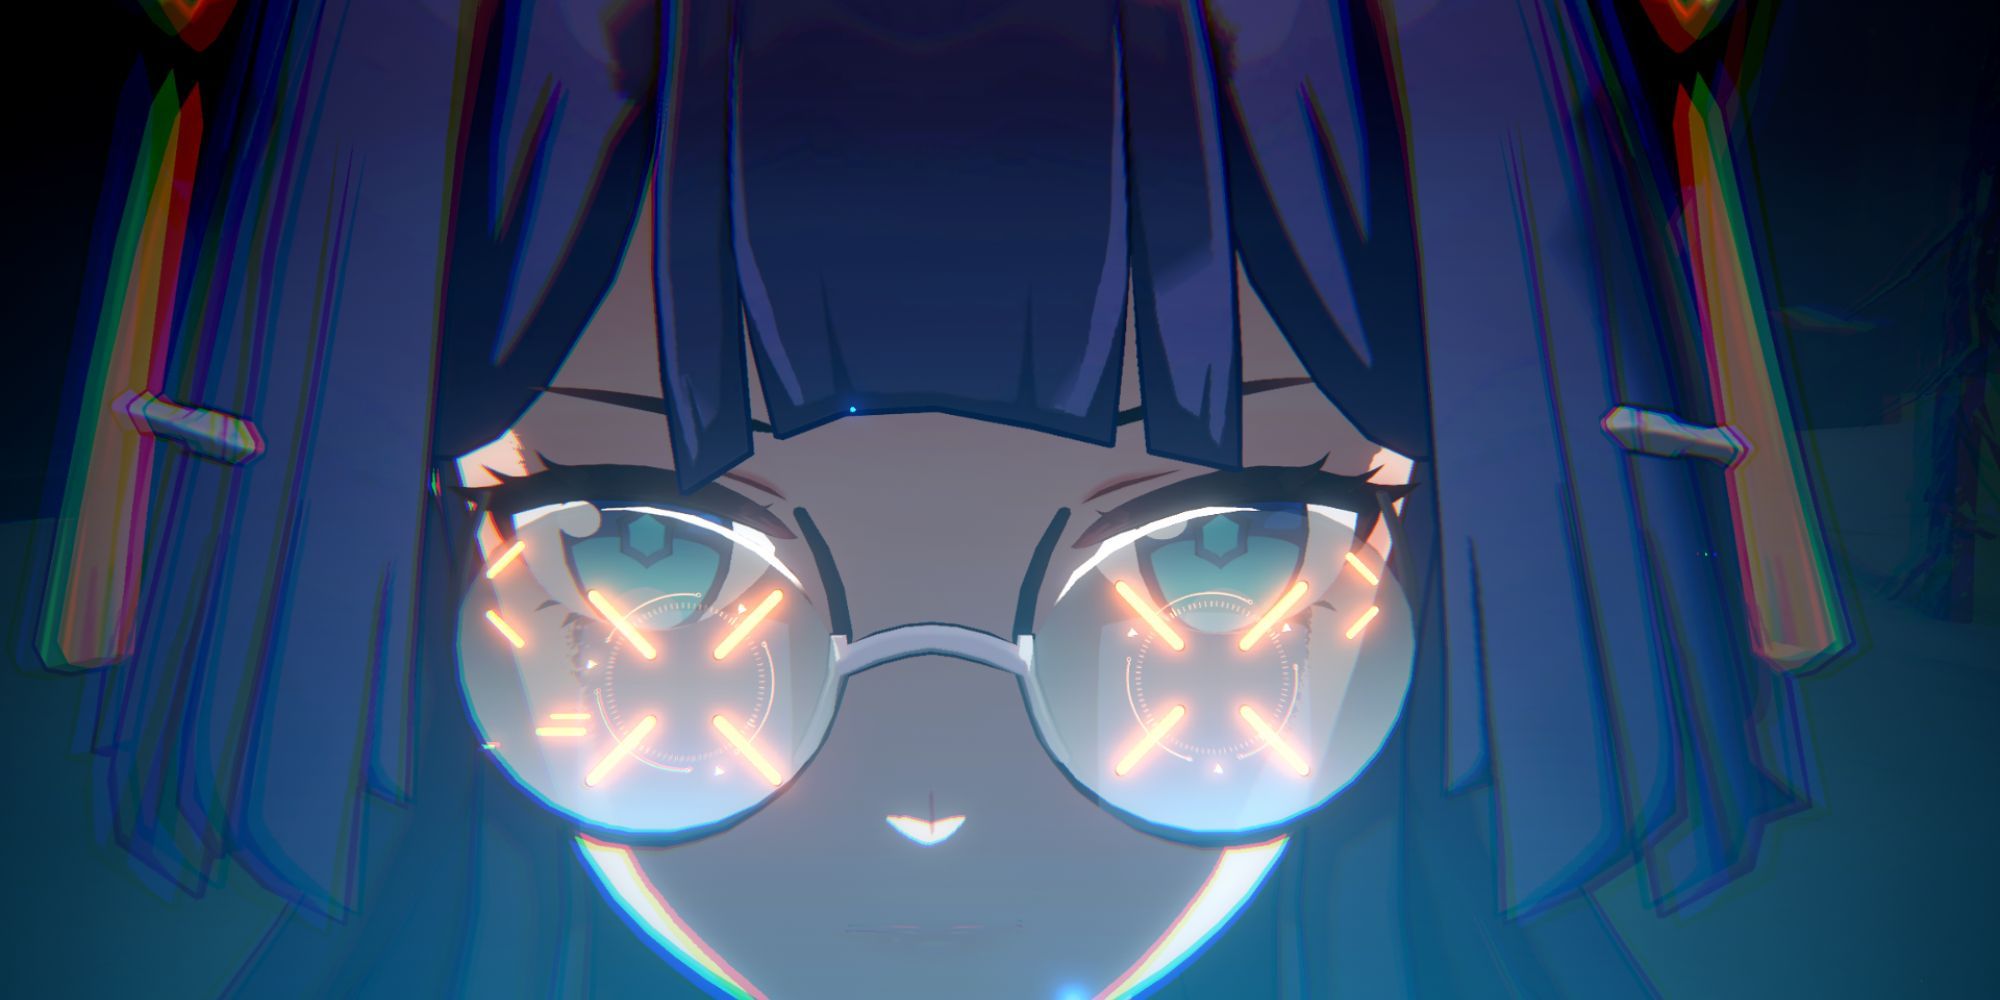 Honkai: Star Rail - Pela looks at the enemies with crosshairs on her glasses during her Ultimate